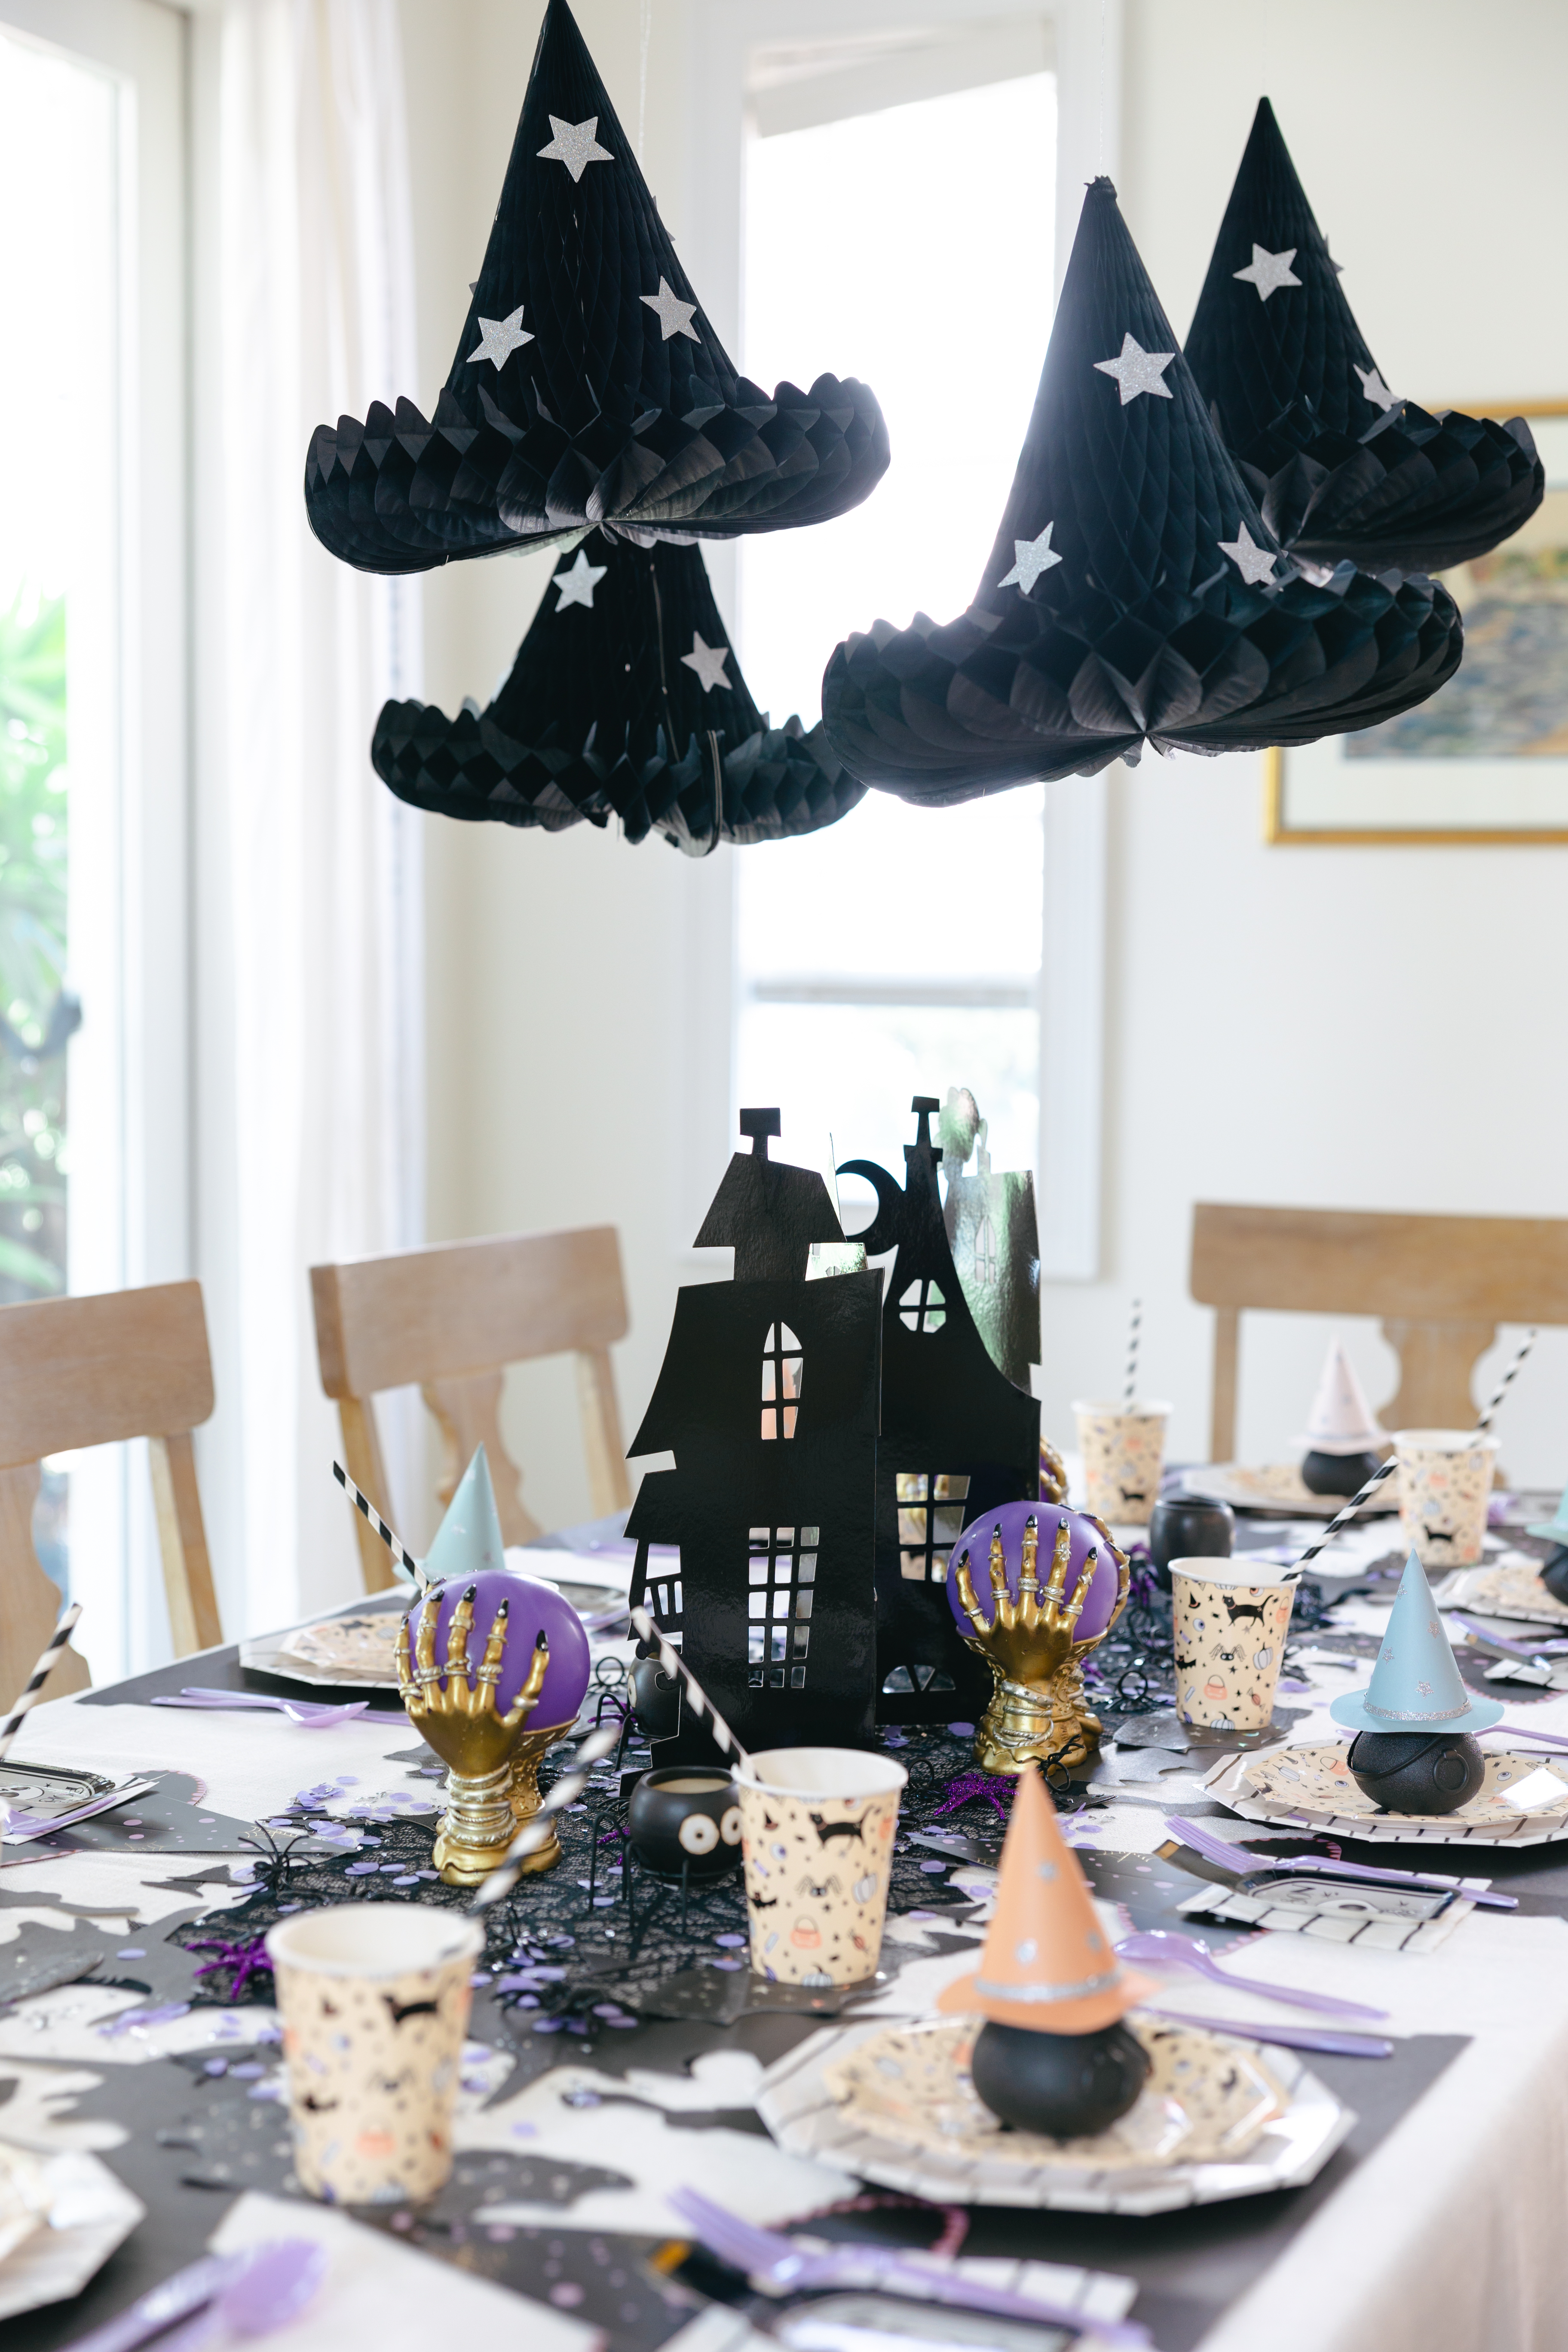 Table set for a party with pastel Halloween paper goods and honeycomb witch hats hanging overhead
